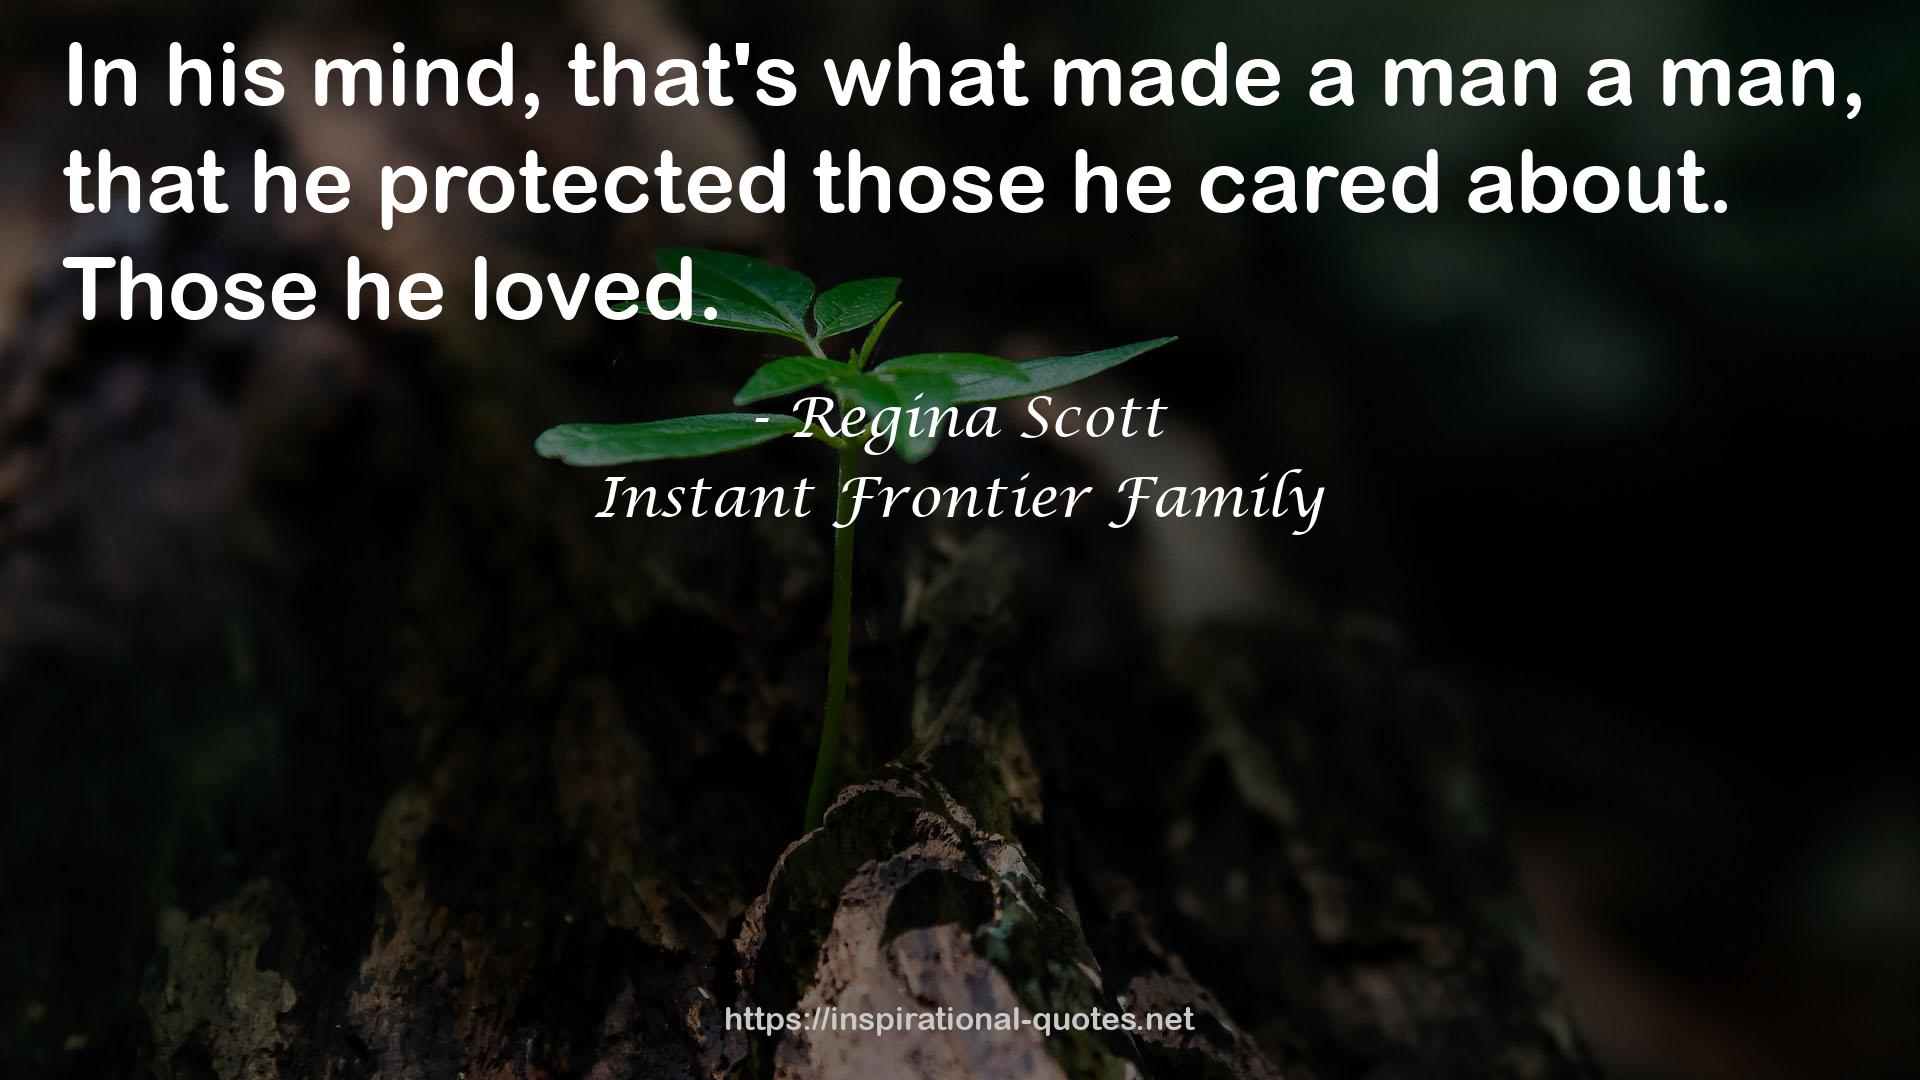 Instant Frontier Family QUOTES